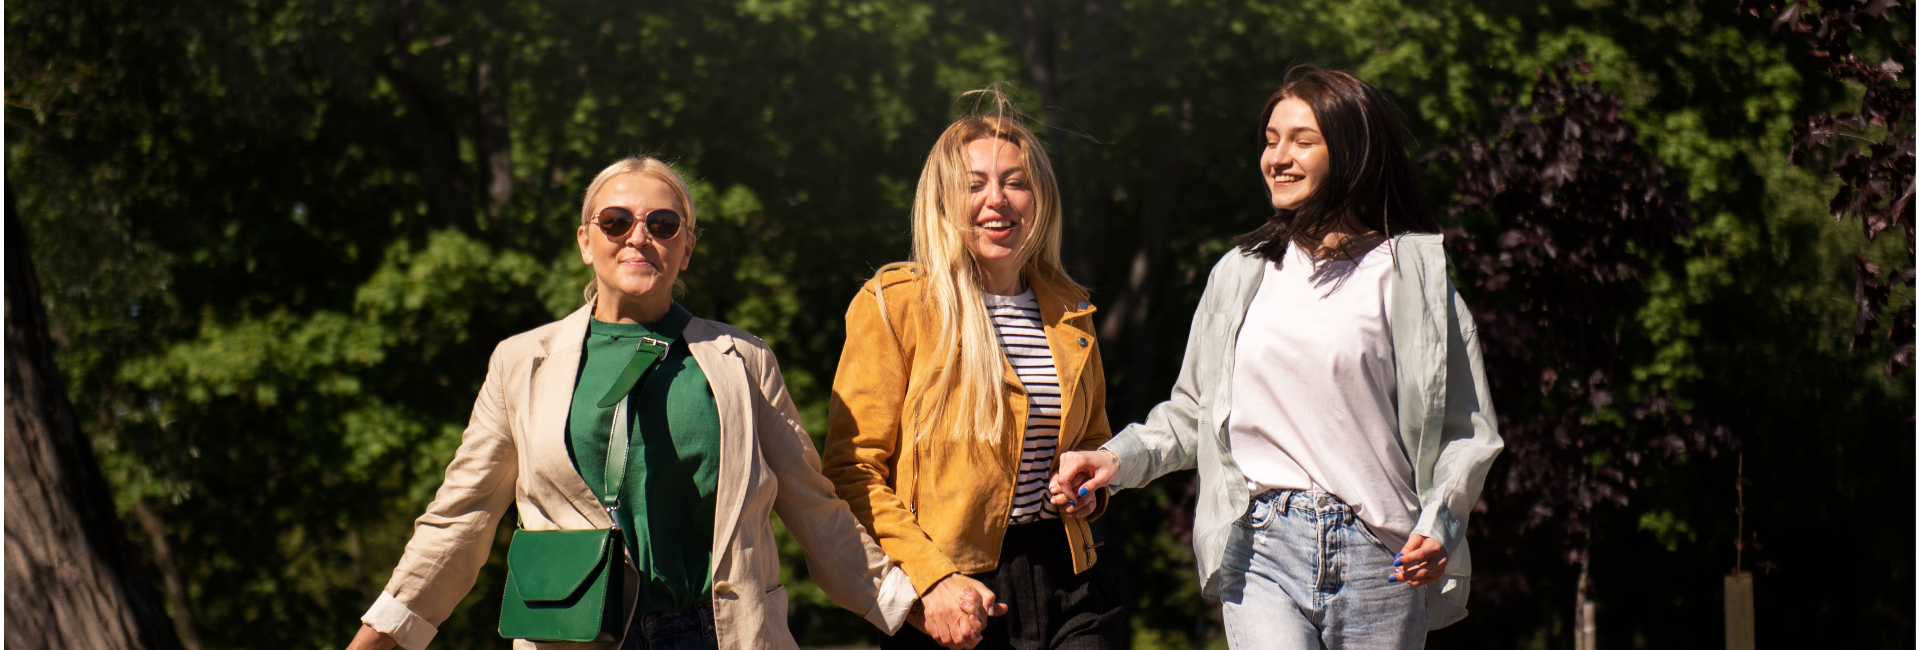 three women smiling happy on a walk together spring weather outdoors